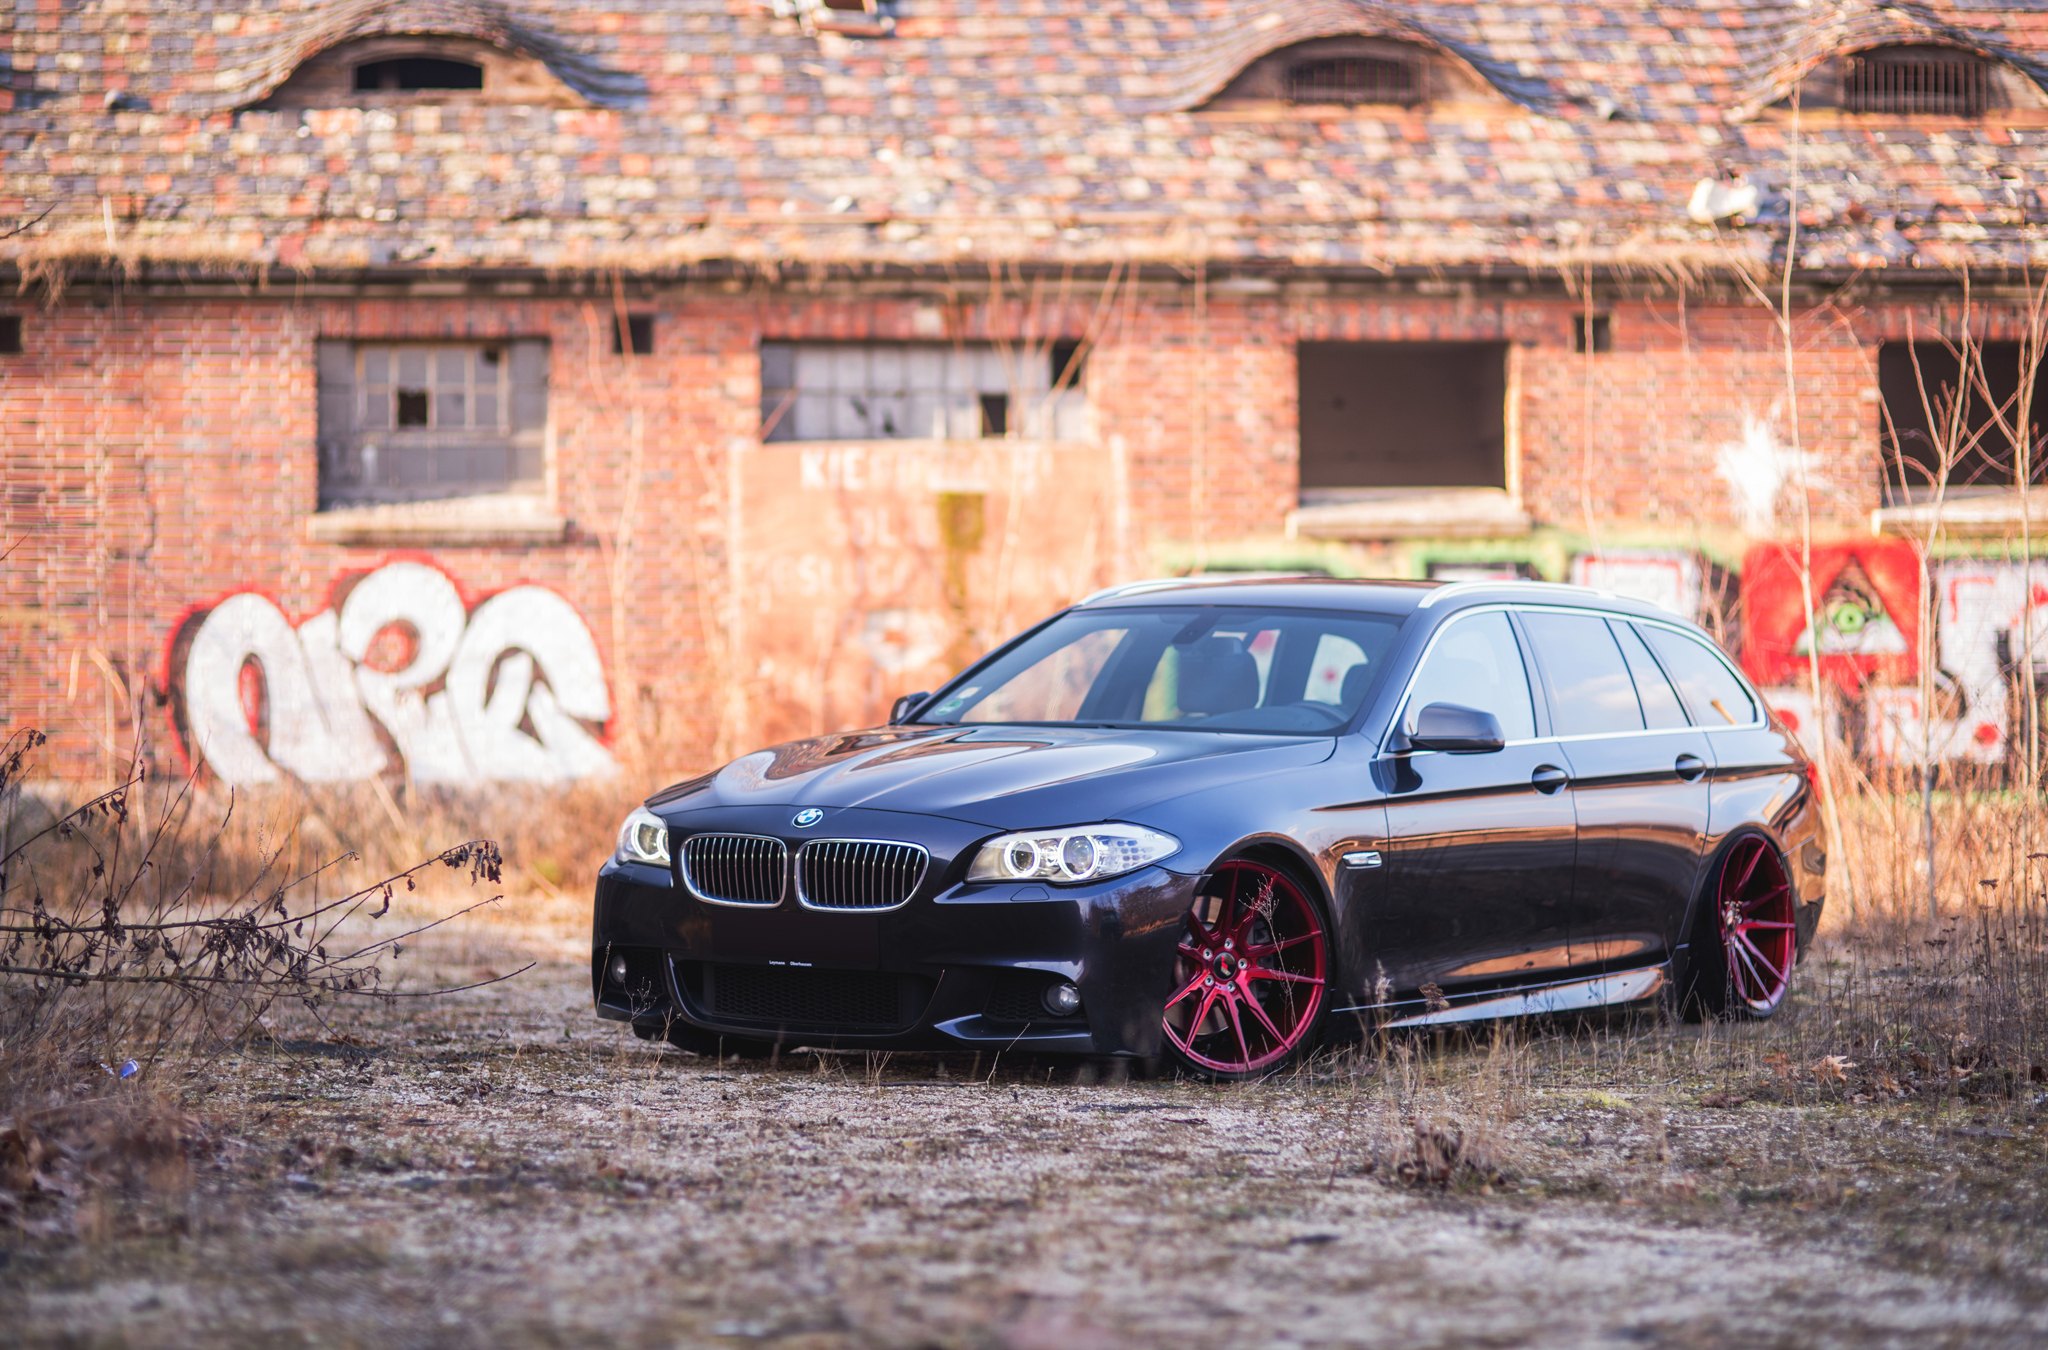 Front Bumper with Fog Lights on Black BMW 5-Series - Photo by JR Wheels